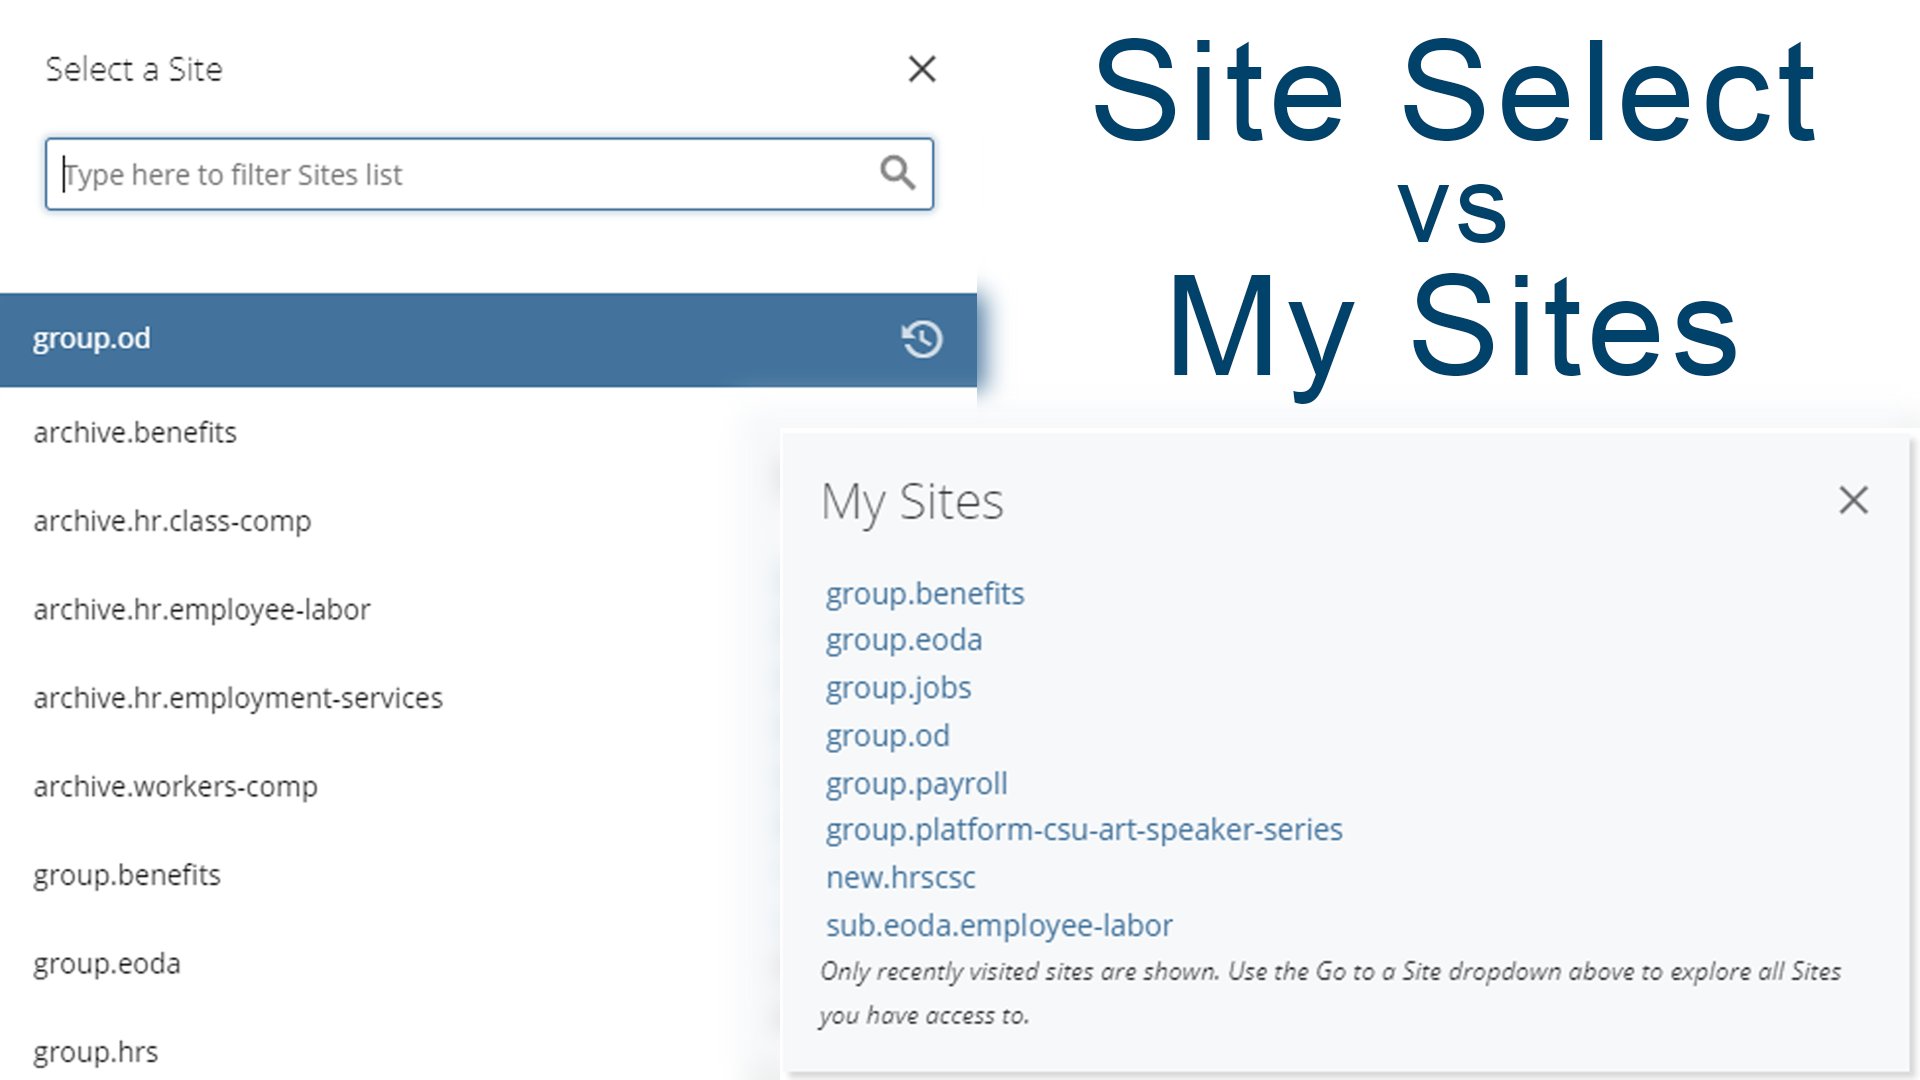 site select vs my sites image